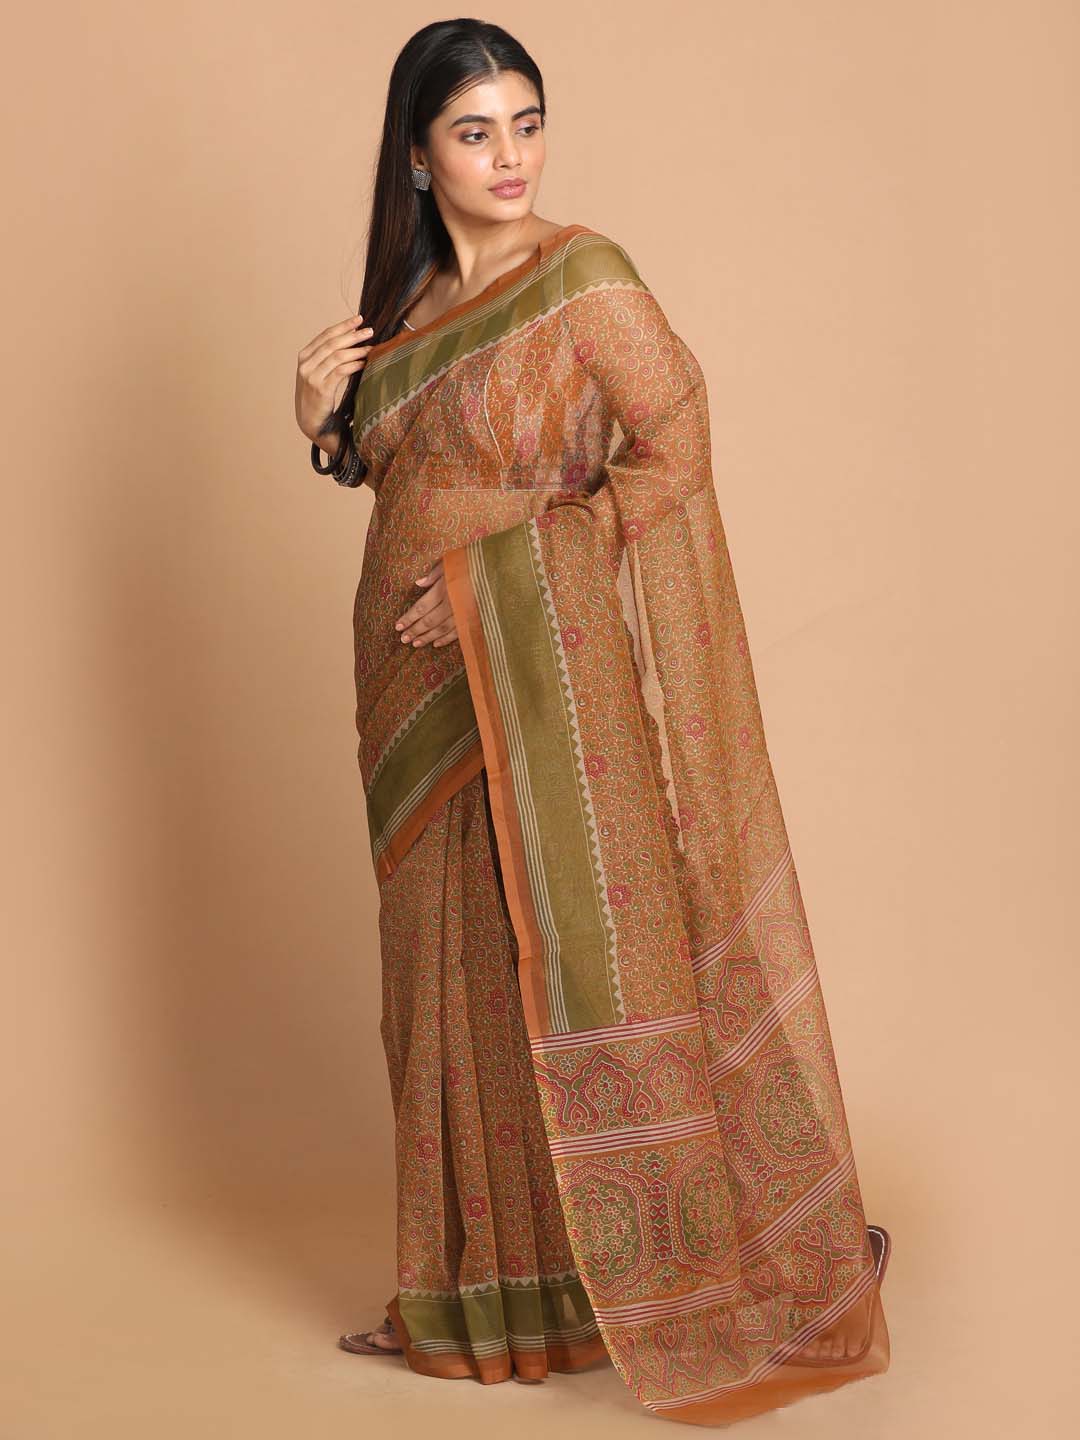 Indethnic Printed Cotton Blend Saree in Tan - View 1